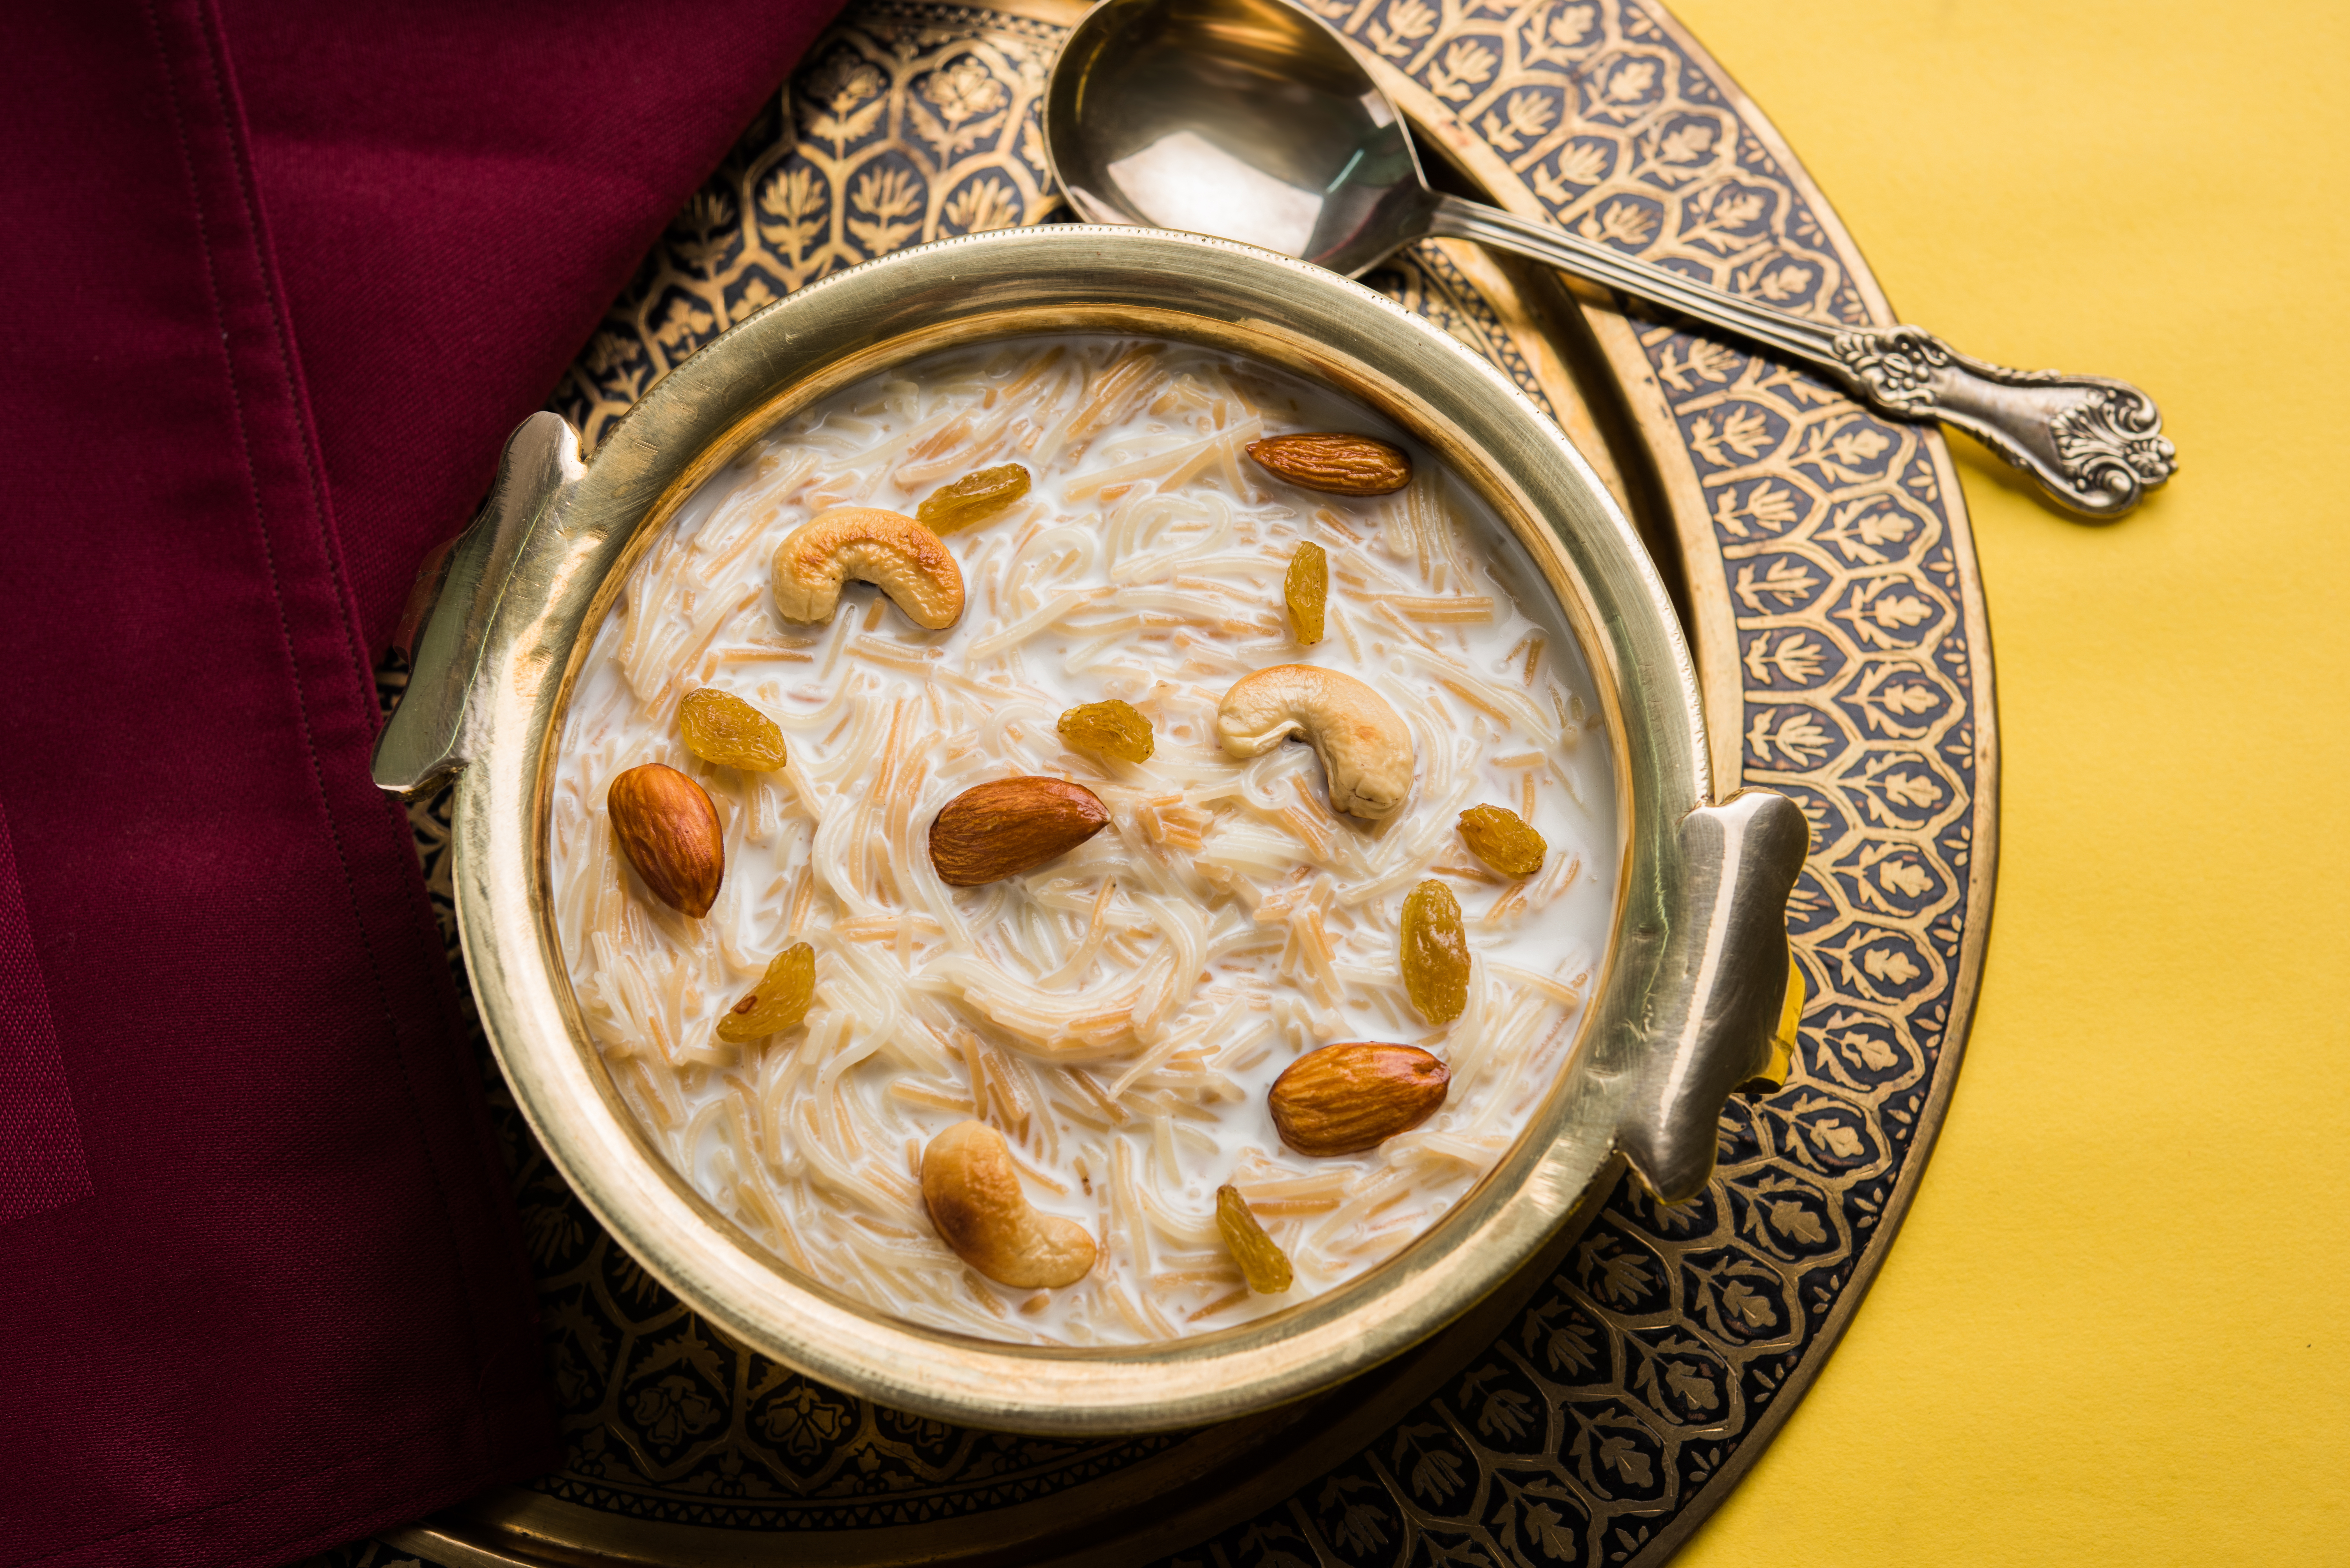 Happy Pongal 2022: 5 Delicious Payasam Recipes You Must Try